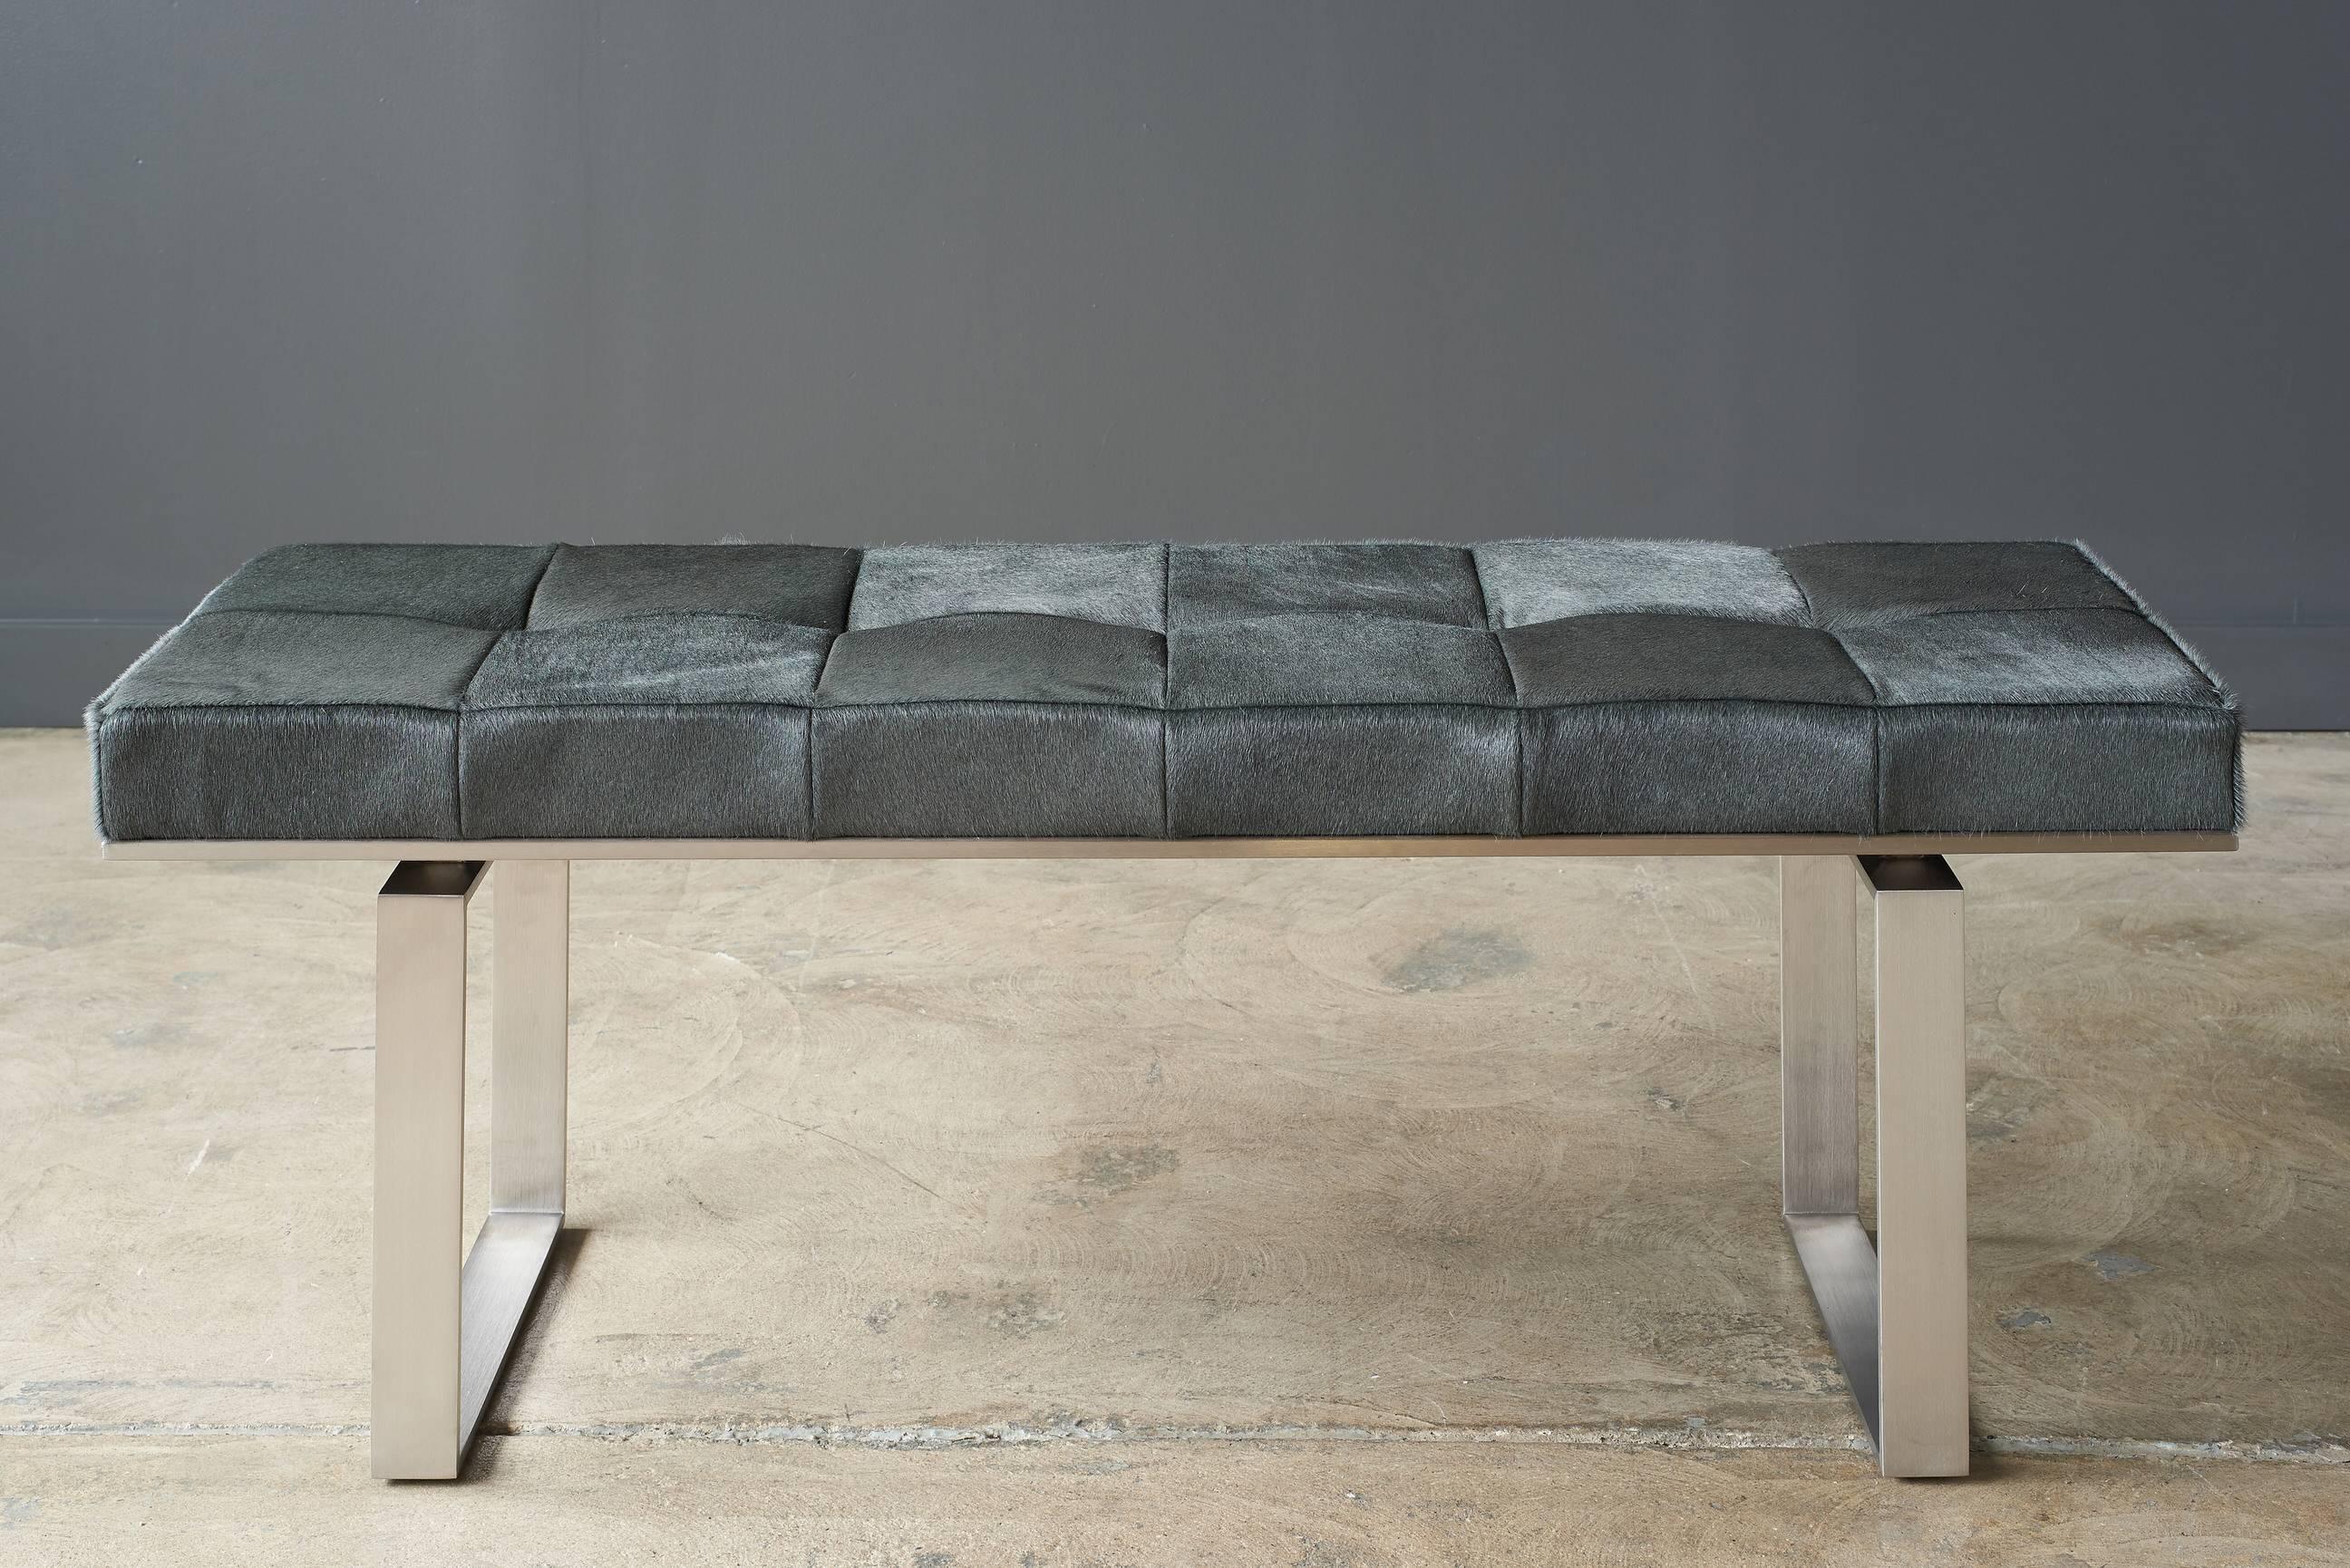 Shown in Stainless Steel Base and Yerra Iron Grey Hide. 
Measure: 48" x 16" x 18"H.

Each Desiron piece is hand-crafted in the U.S.A., fully customizable and available in a variety of finishes.